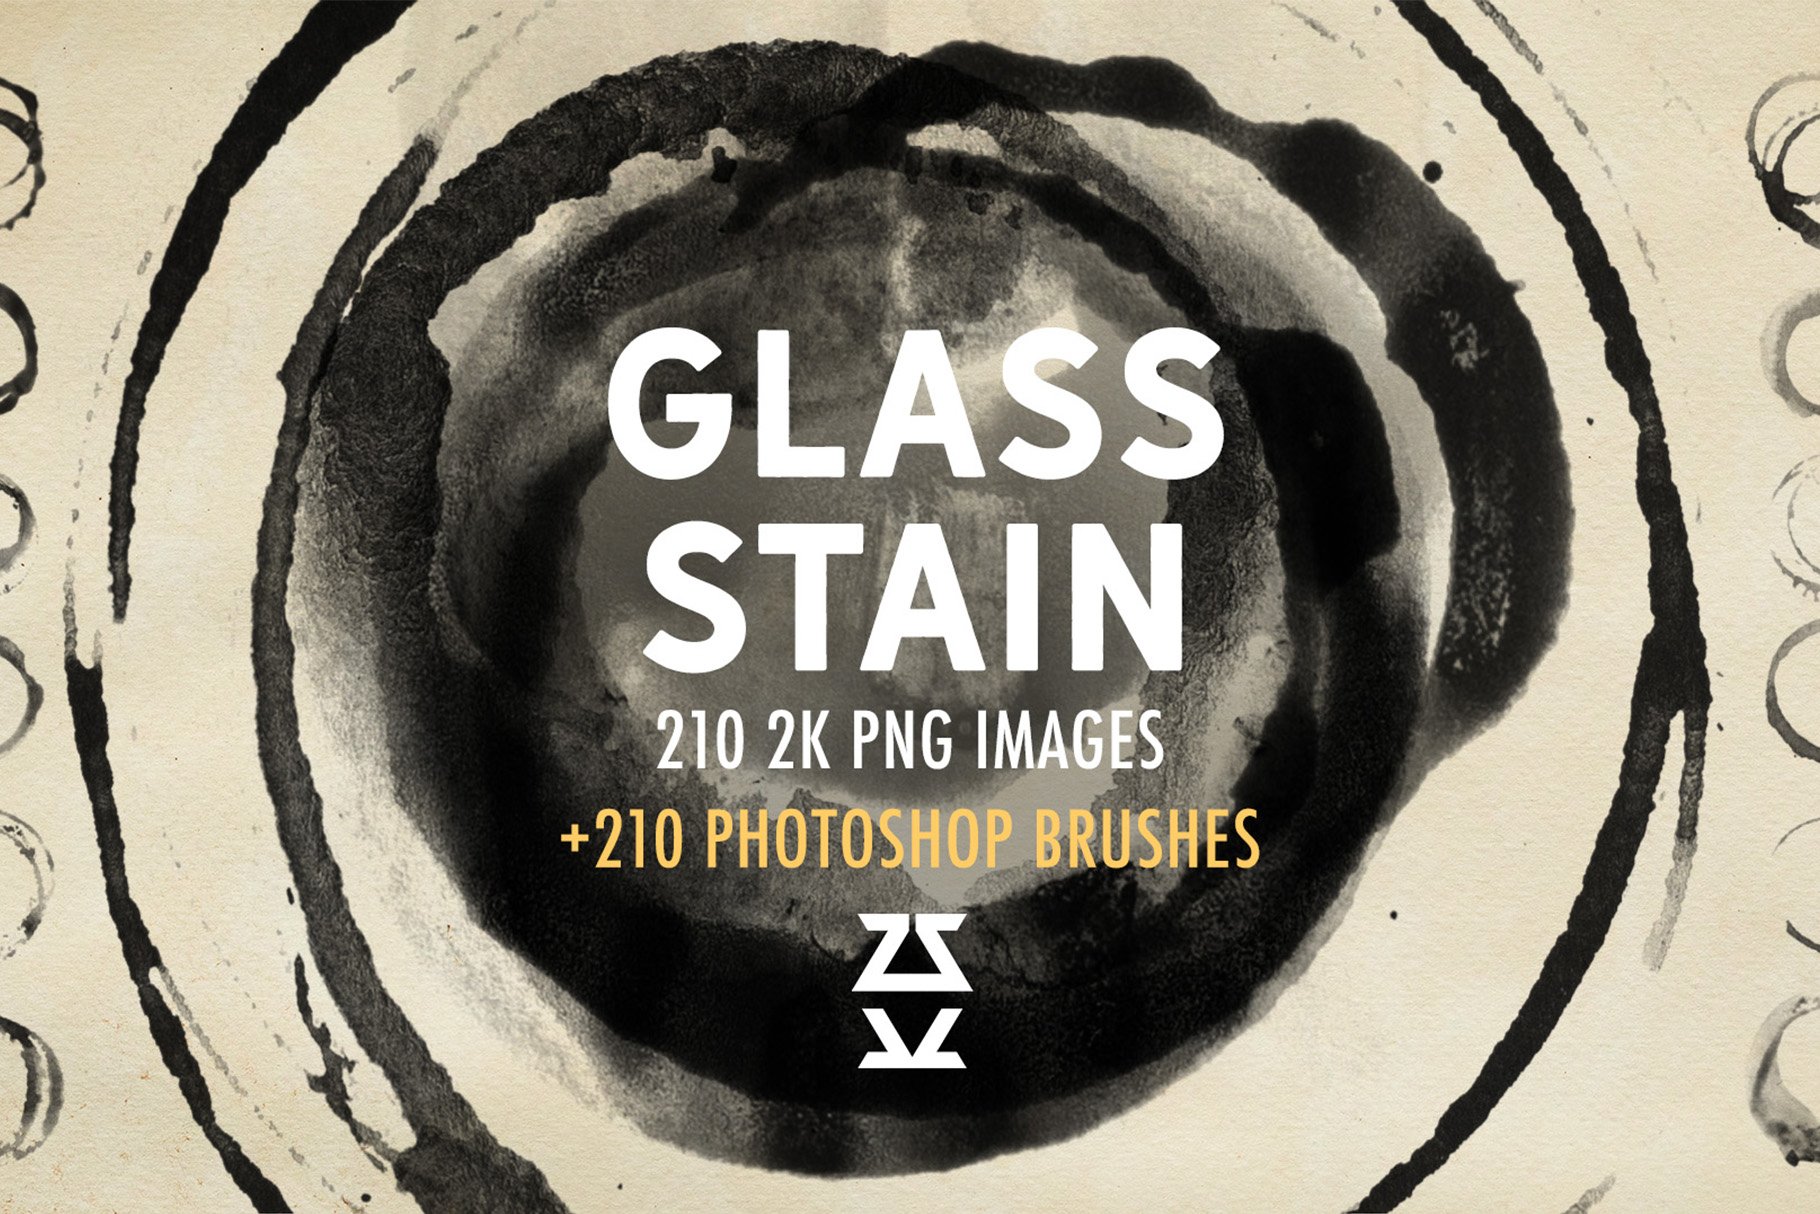 Glass Staincover image.